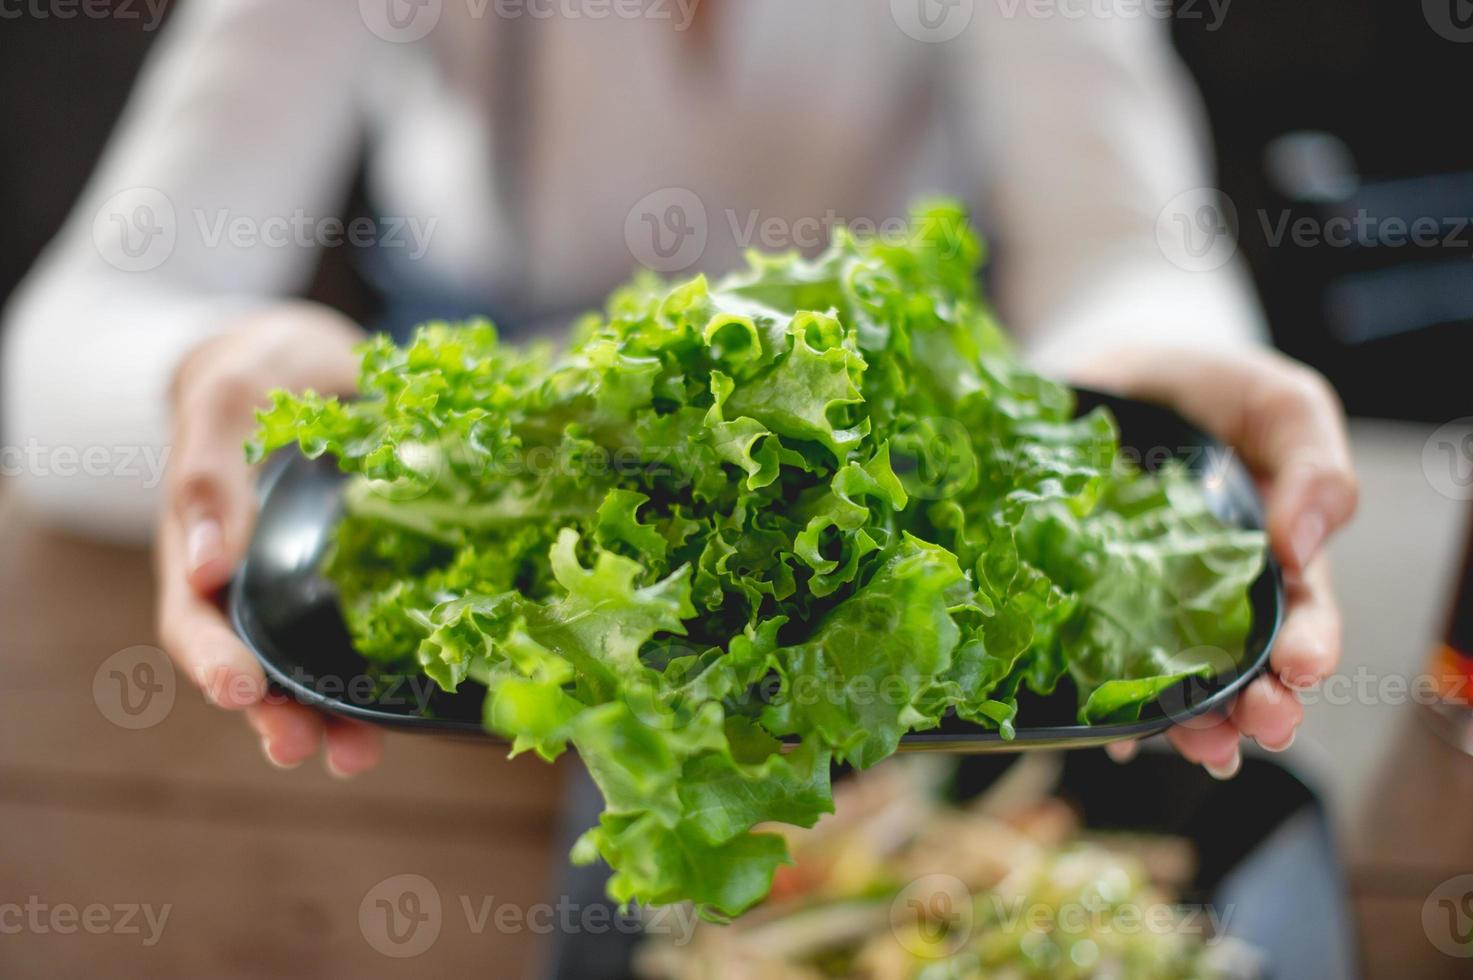 Hands and vegetables, non-toxic foods of people who love health Healthy food concept photo